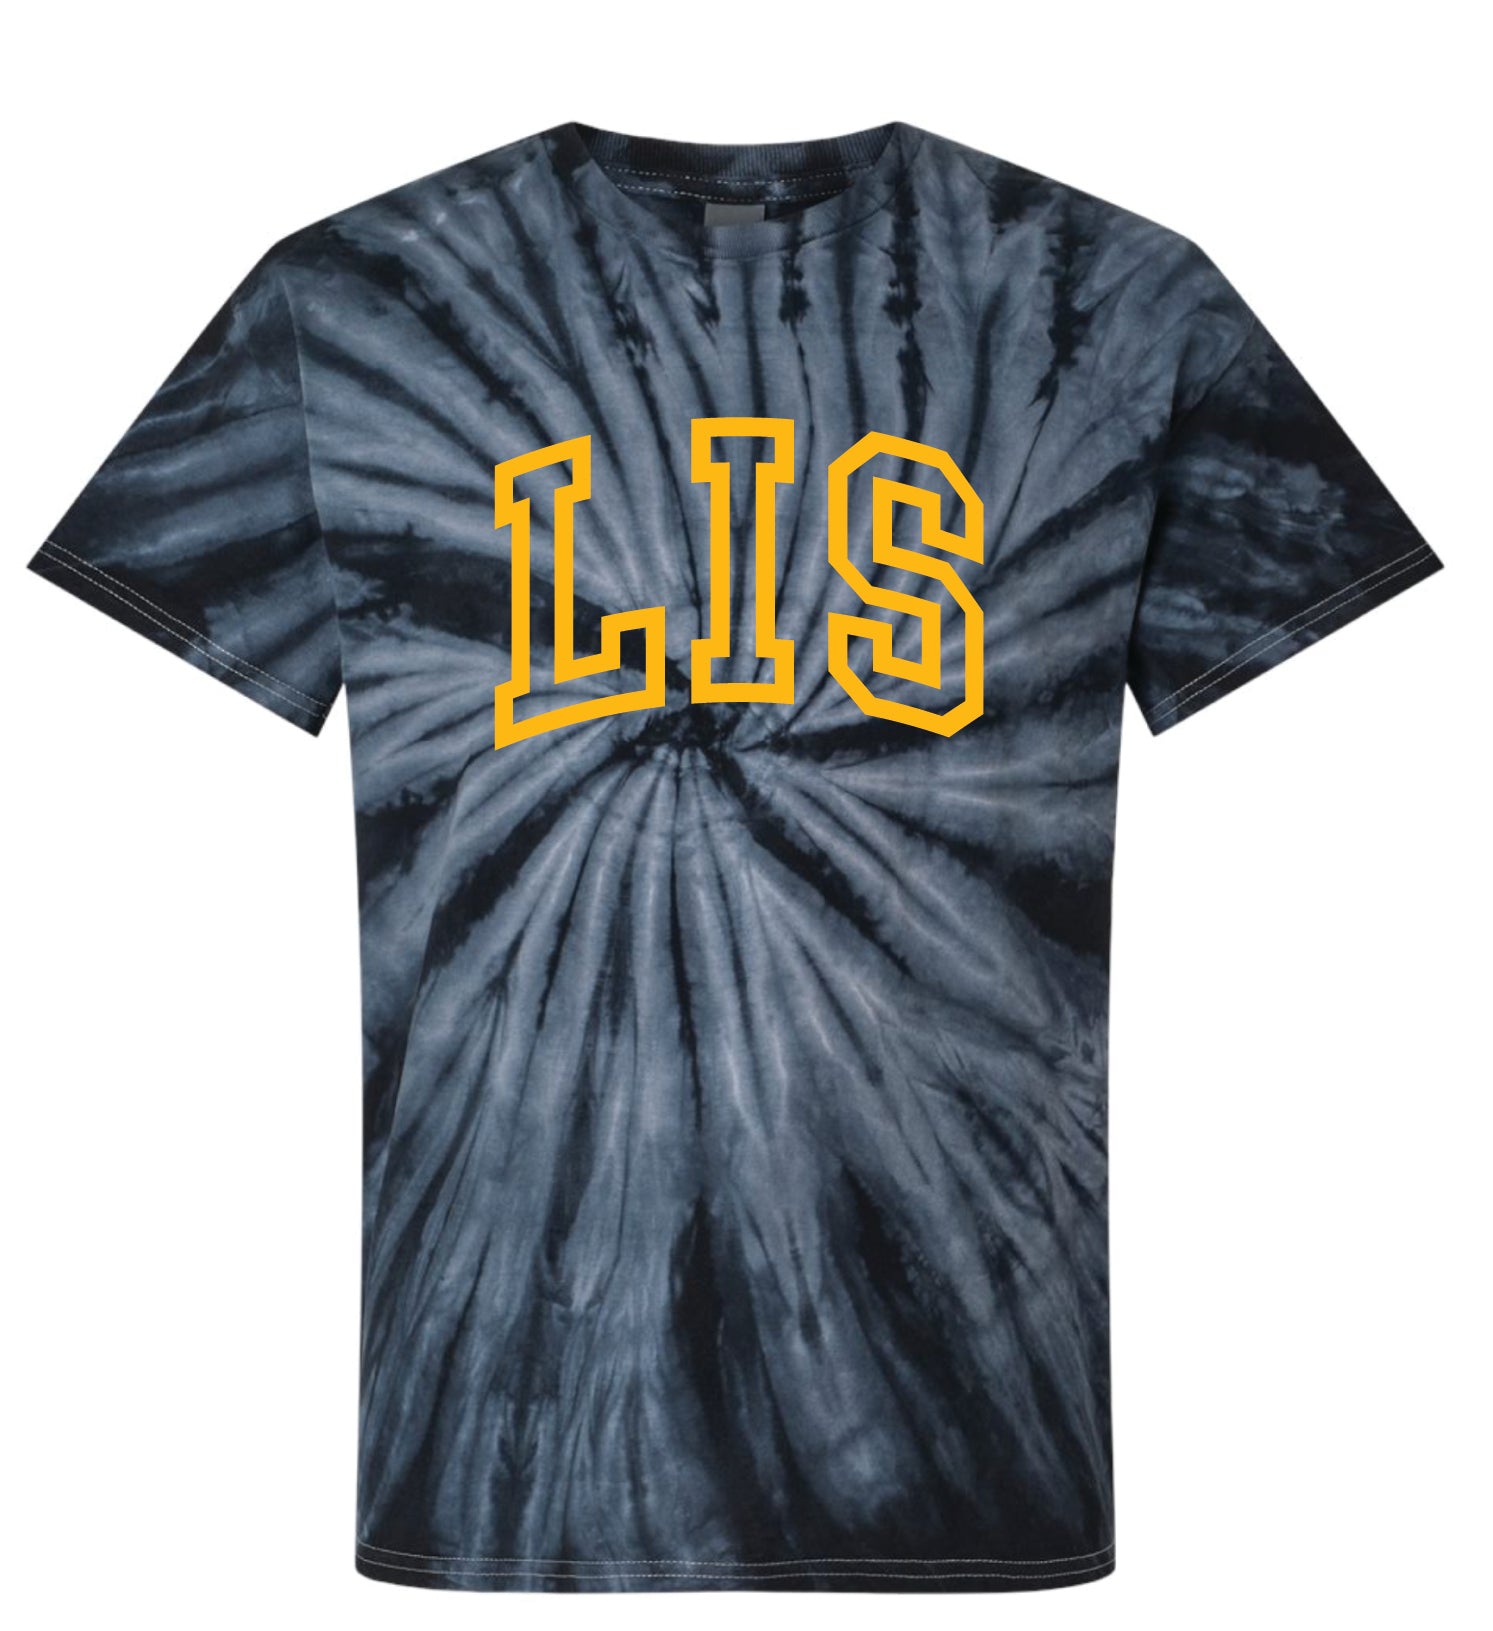 LIS Black Tie-Dye T-Shirt - Adult and Youth